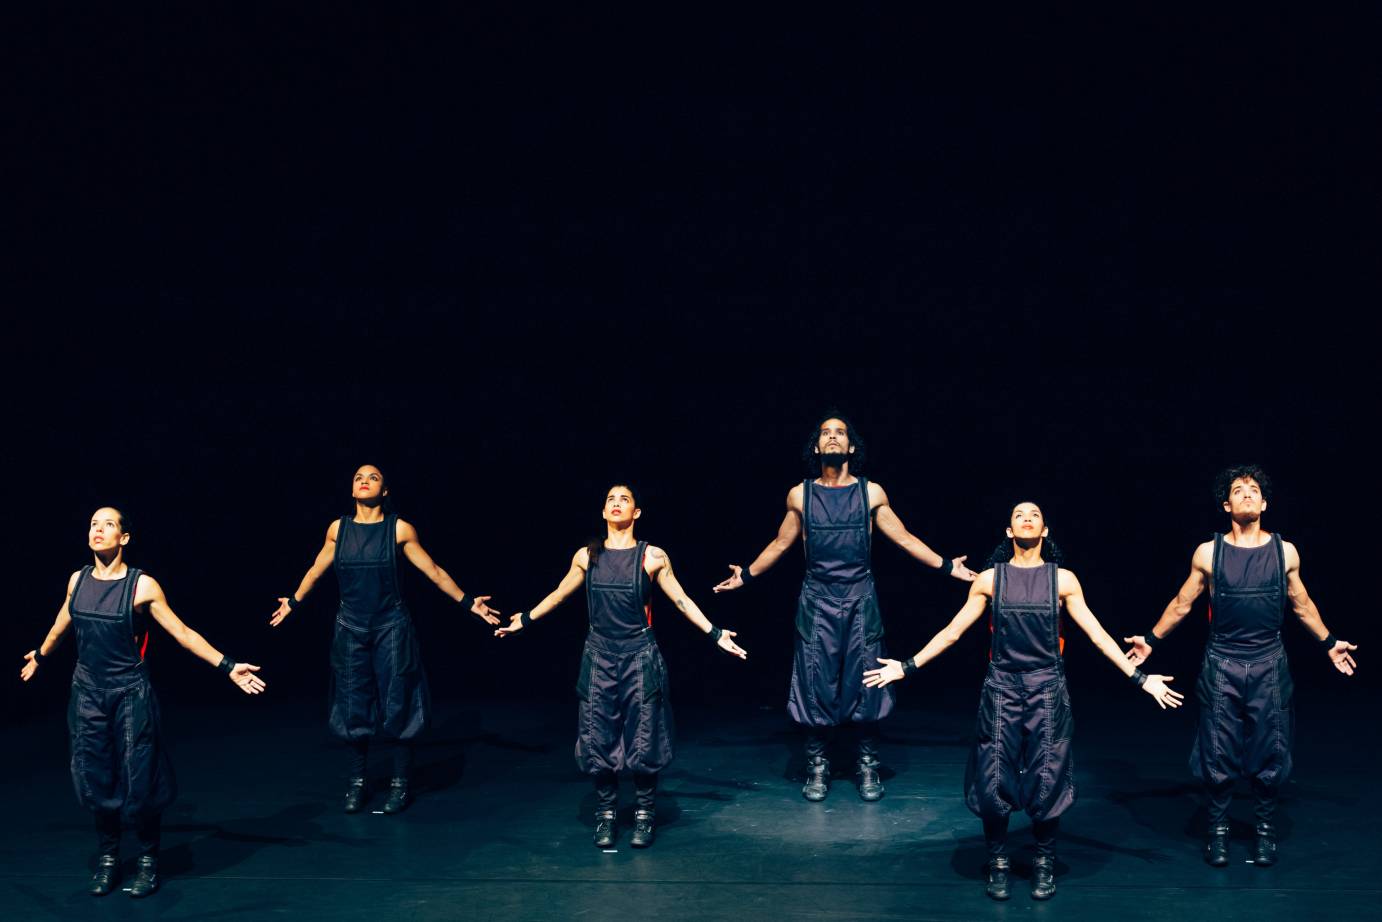 Six dancers extends their arms to the side while looking tough